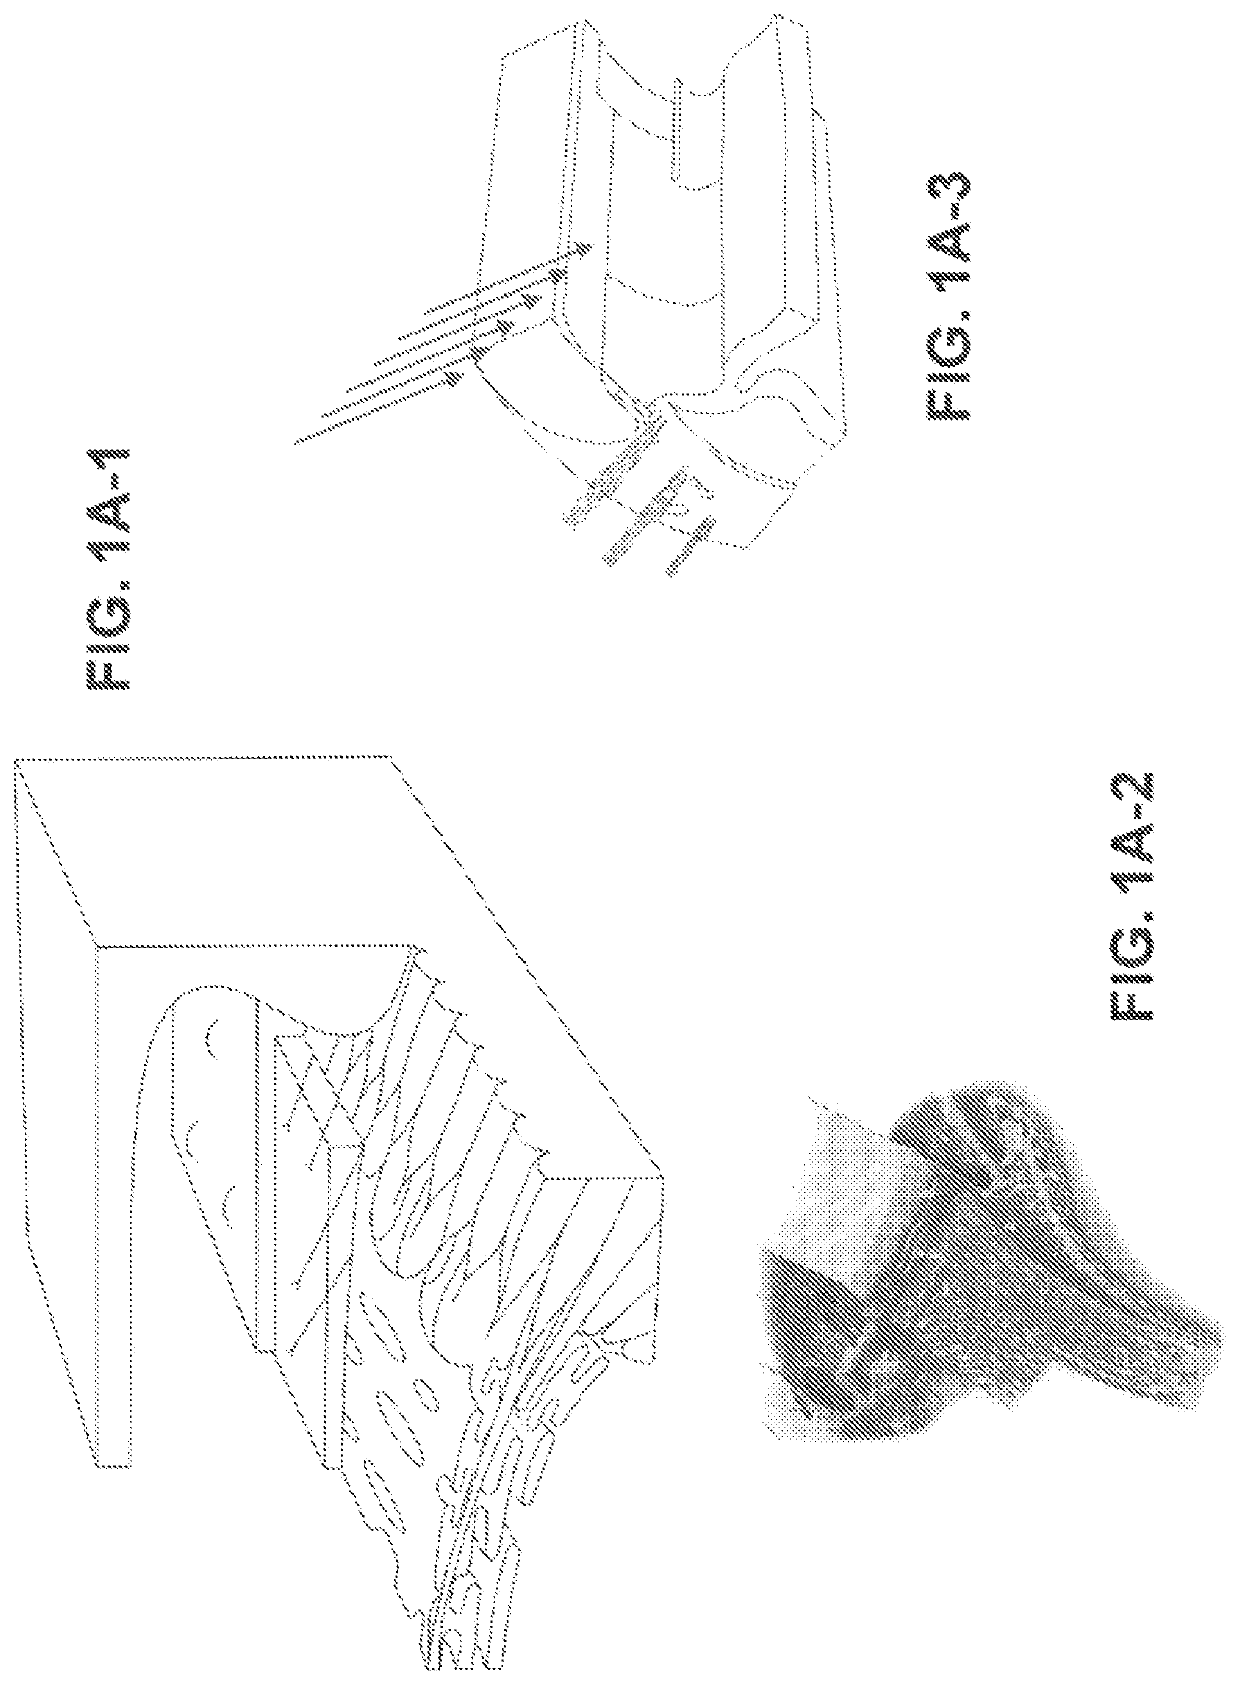 Systems and methods for ocular laser surgery and therapeutic treatments